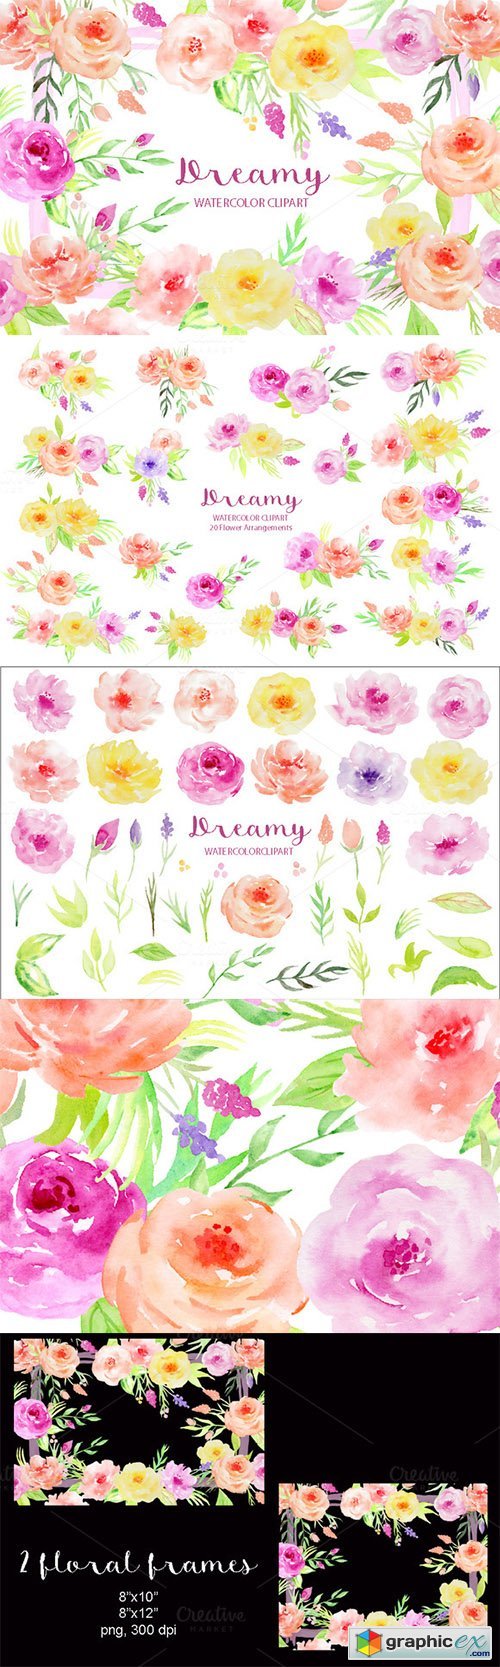 Watercolor Clipart Dreamy Collection